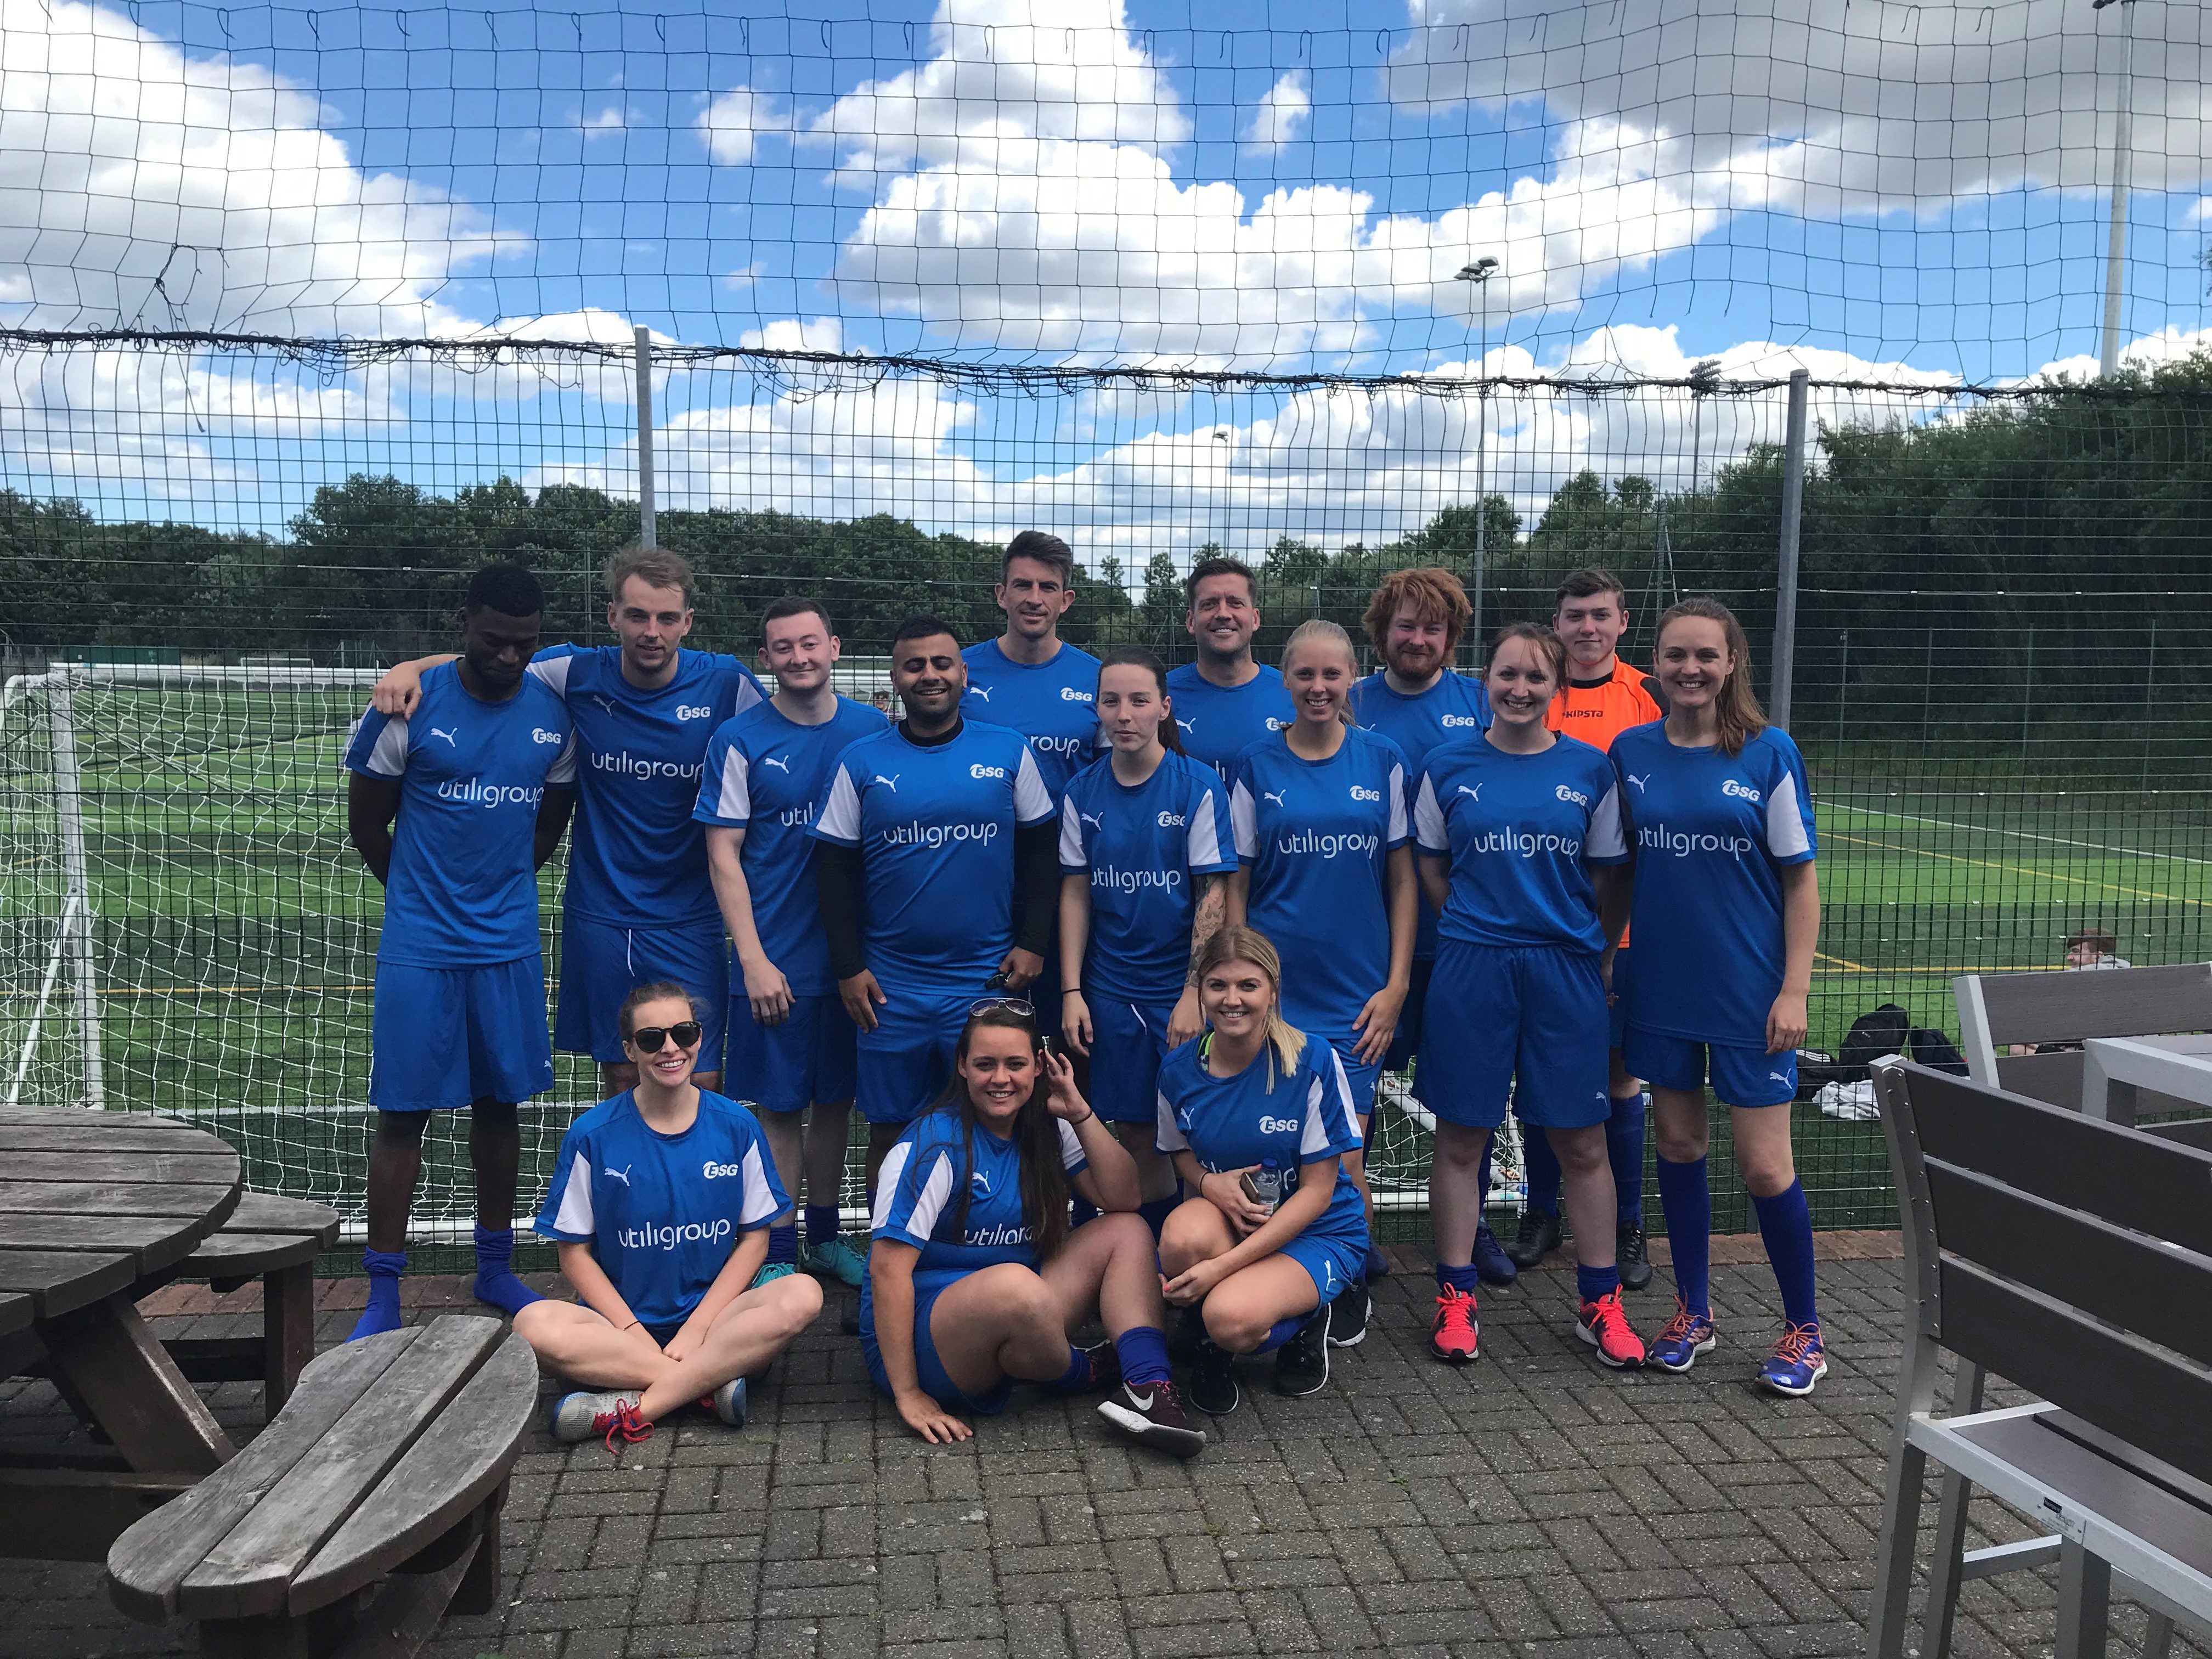 Utiligroup take part in energy themed football tournament